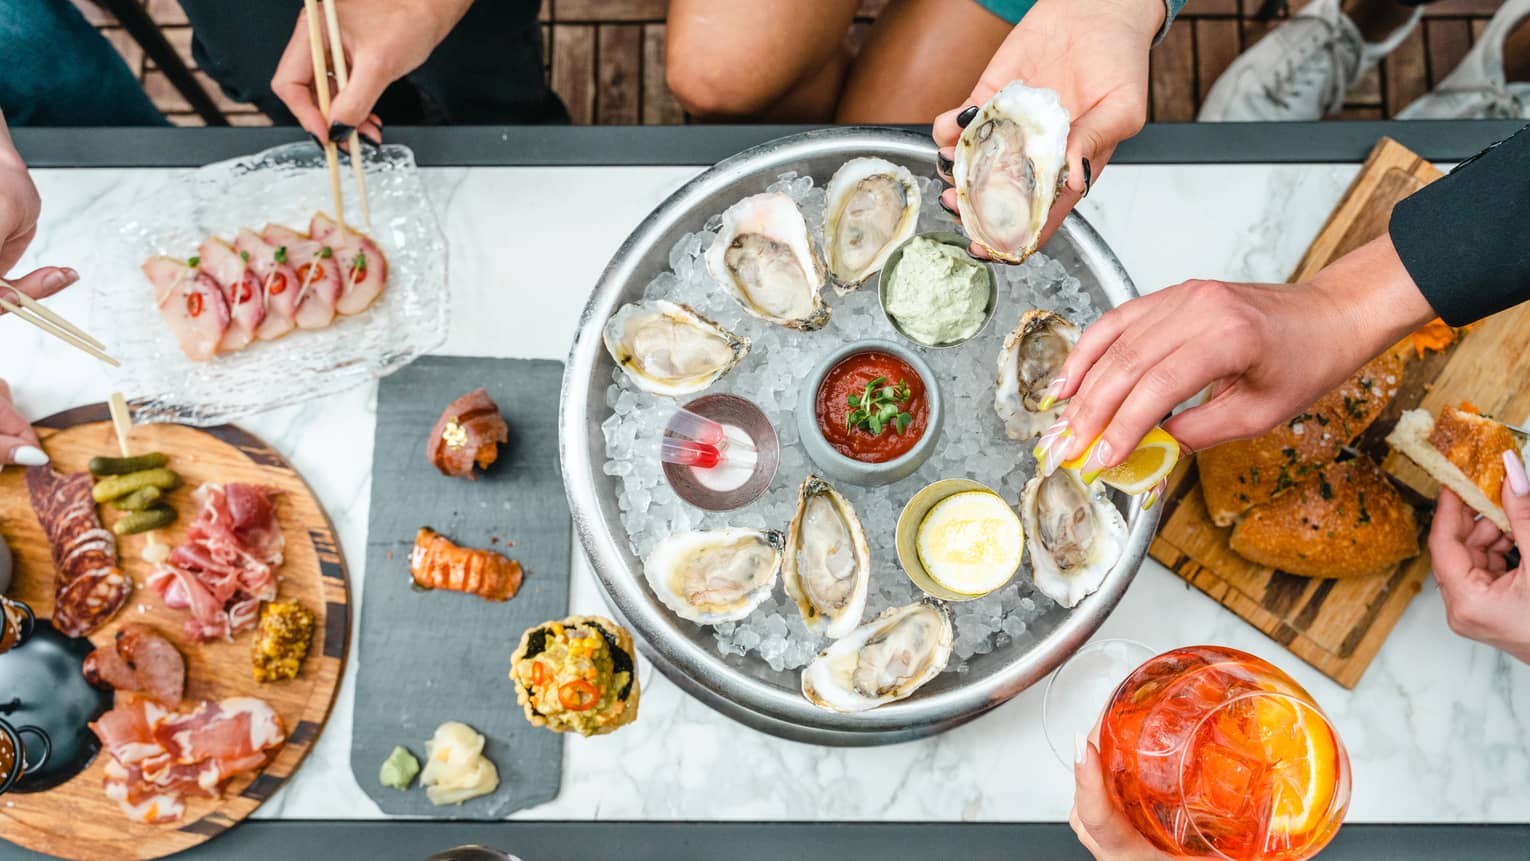 Looking down at a table with various people sharing an oyster-on-ice platter and other appetizers